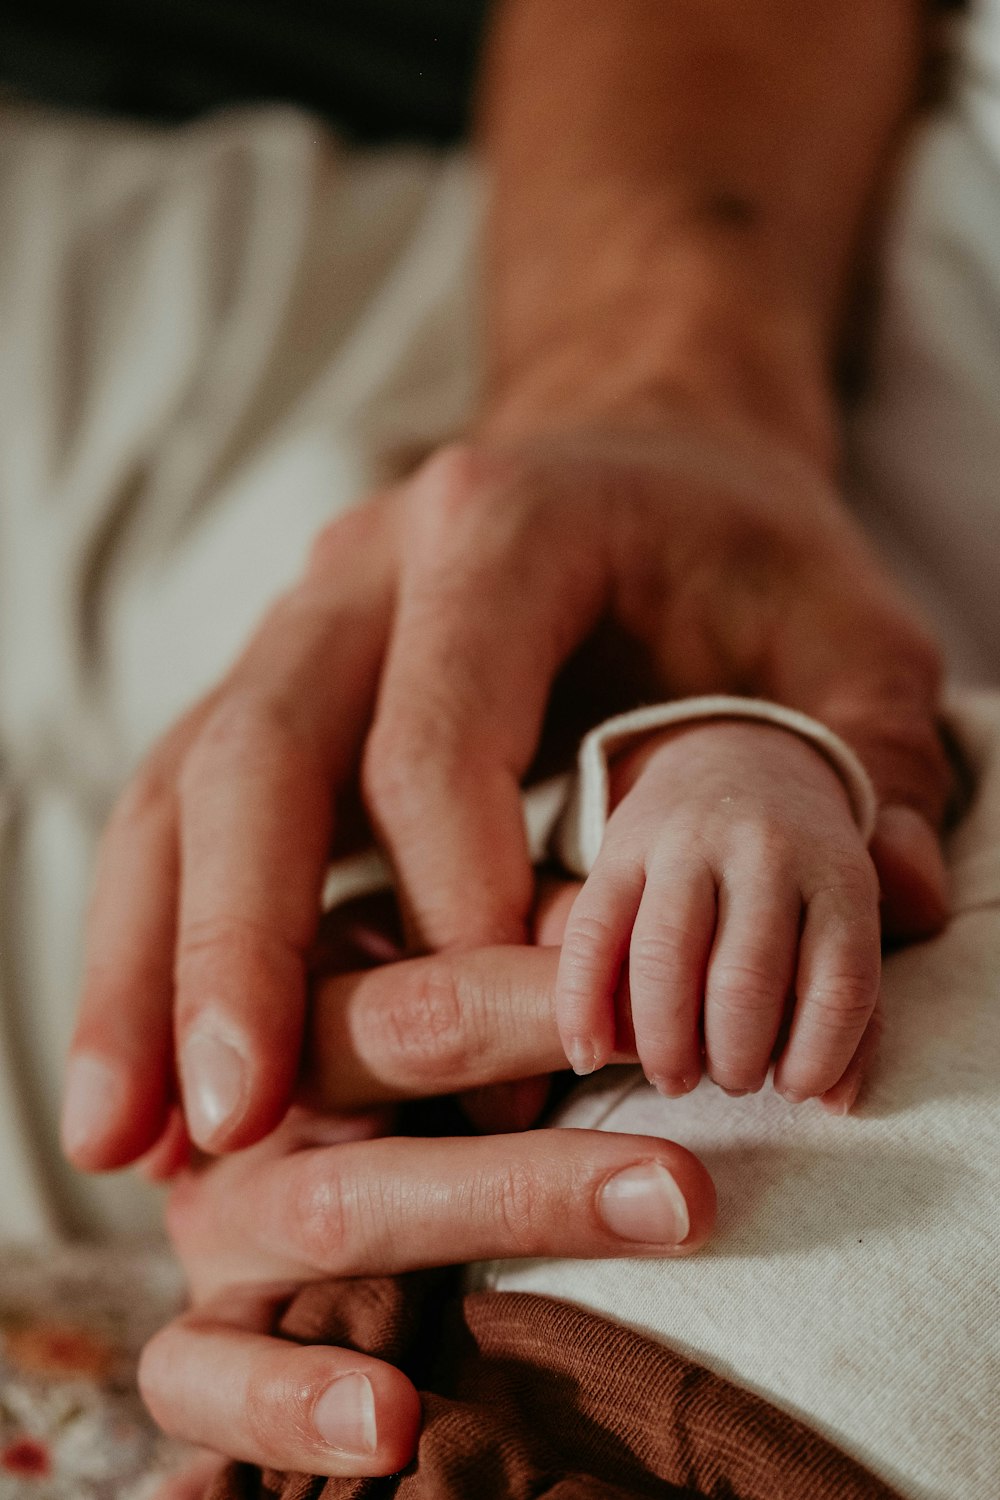 a close-up of a baby's hands